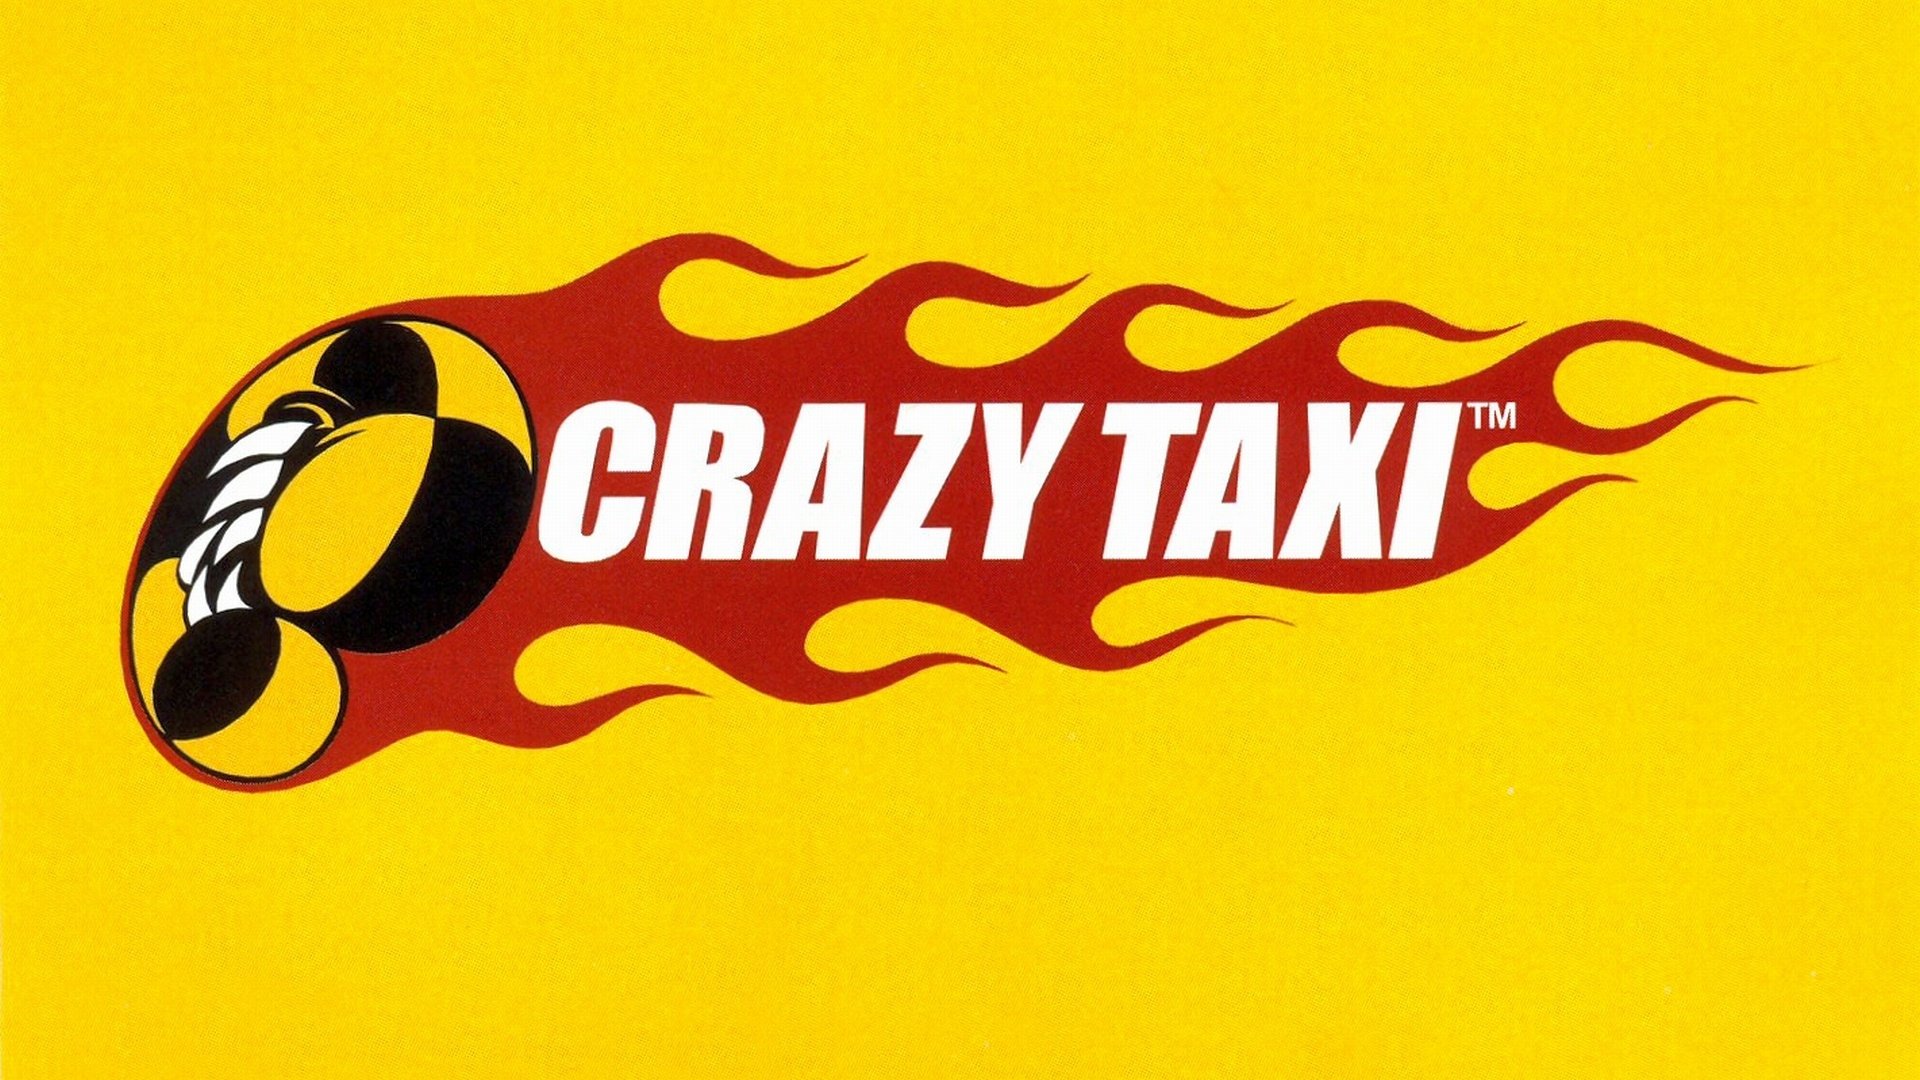 Crazy Taxi HD Wallpaper and Background Image